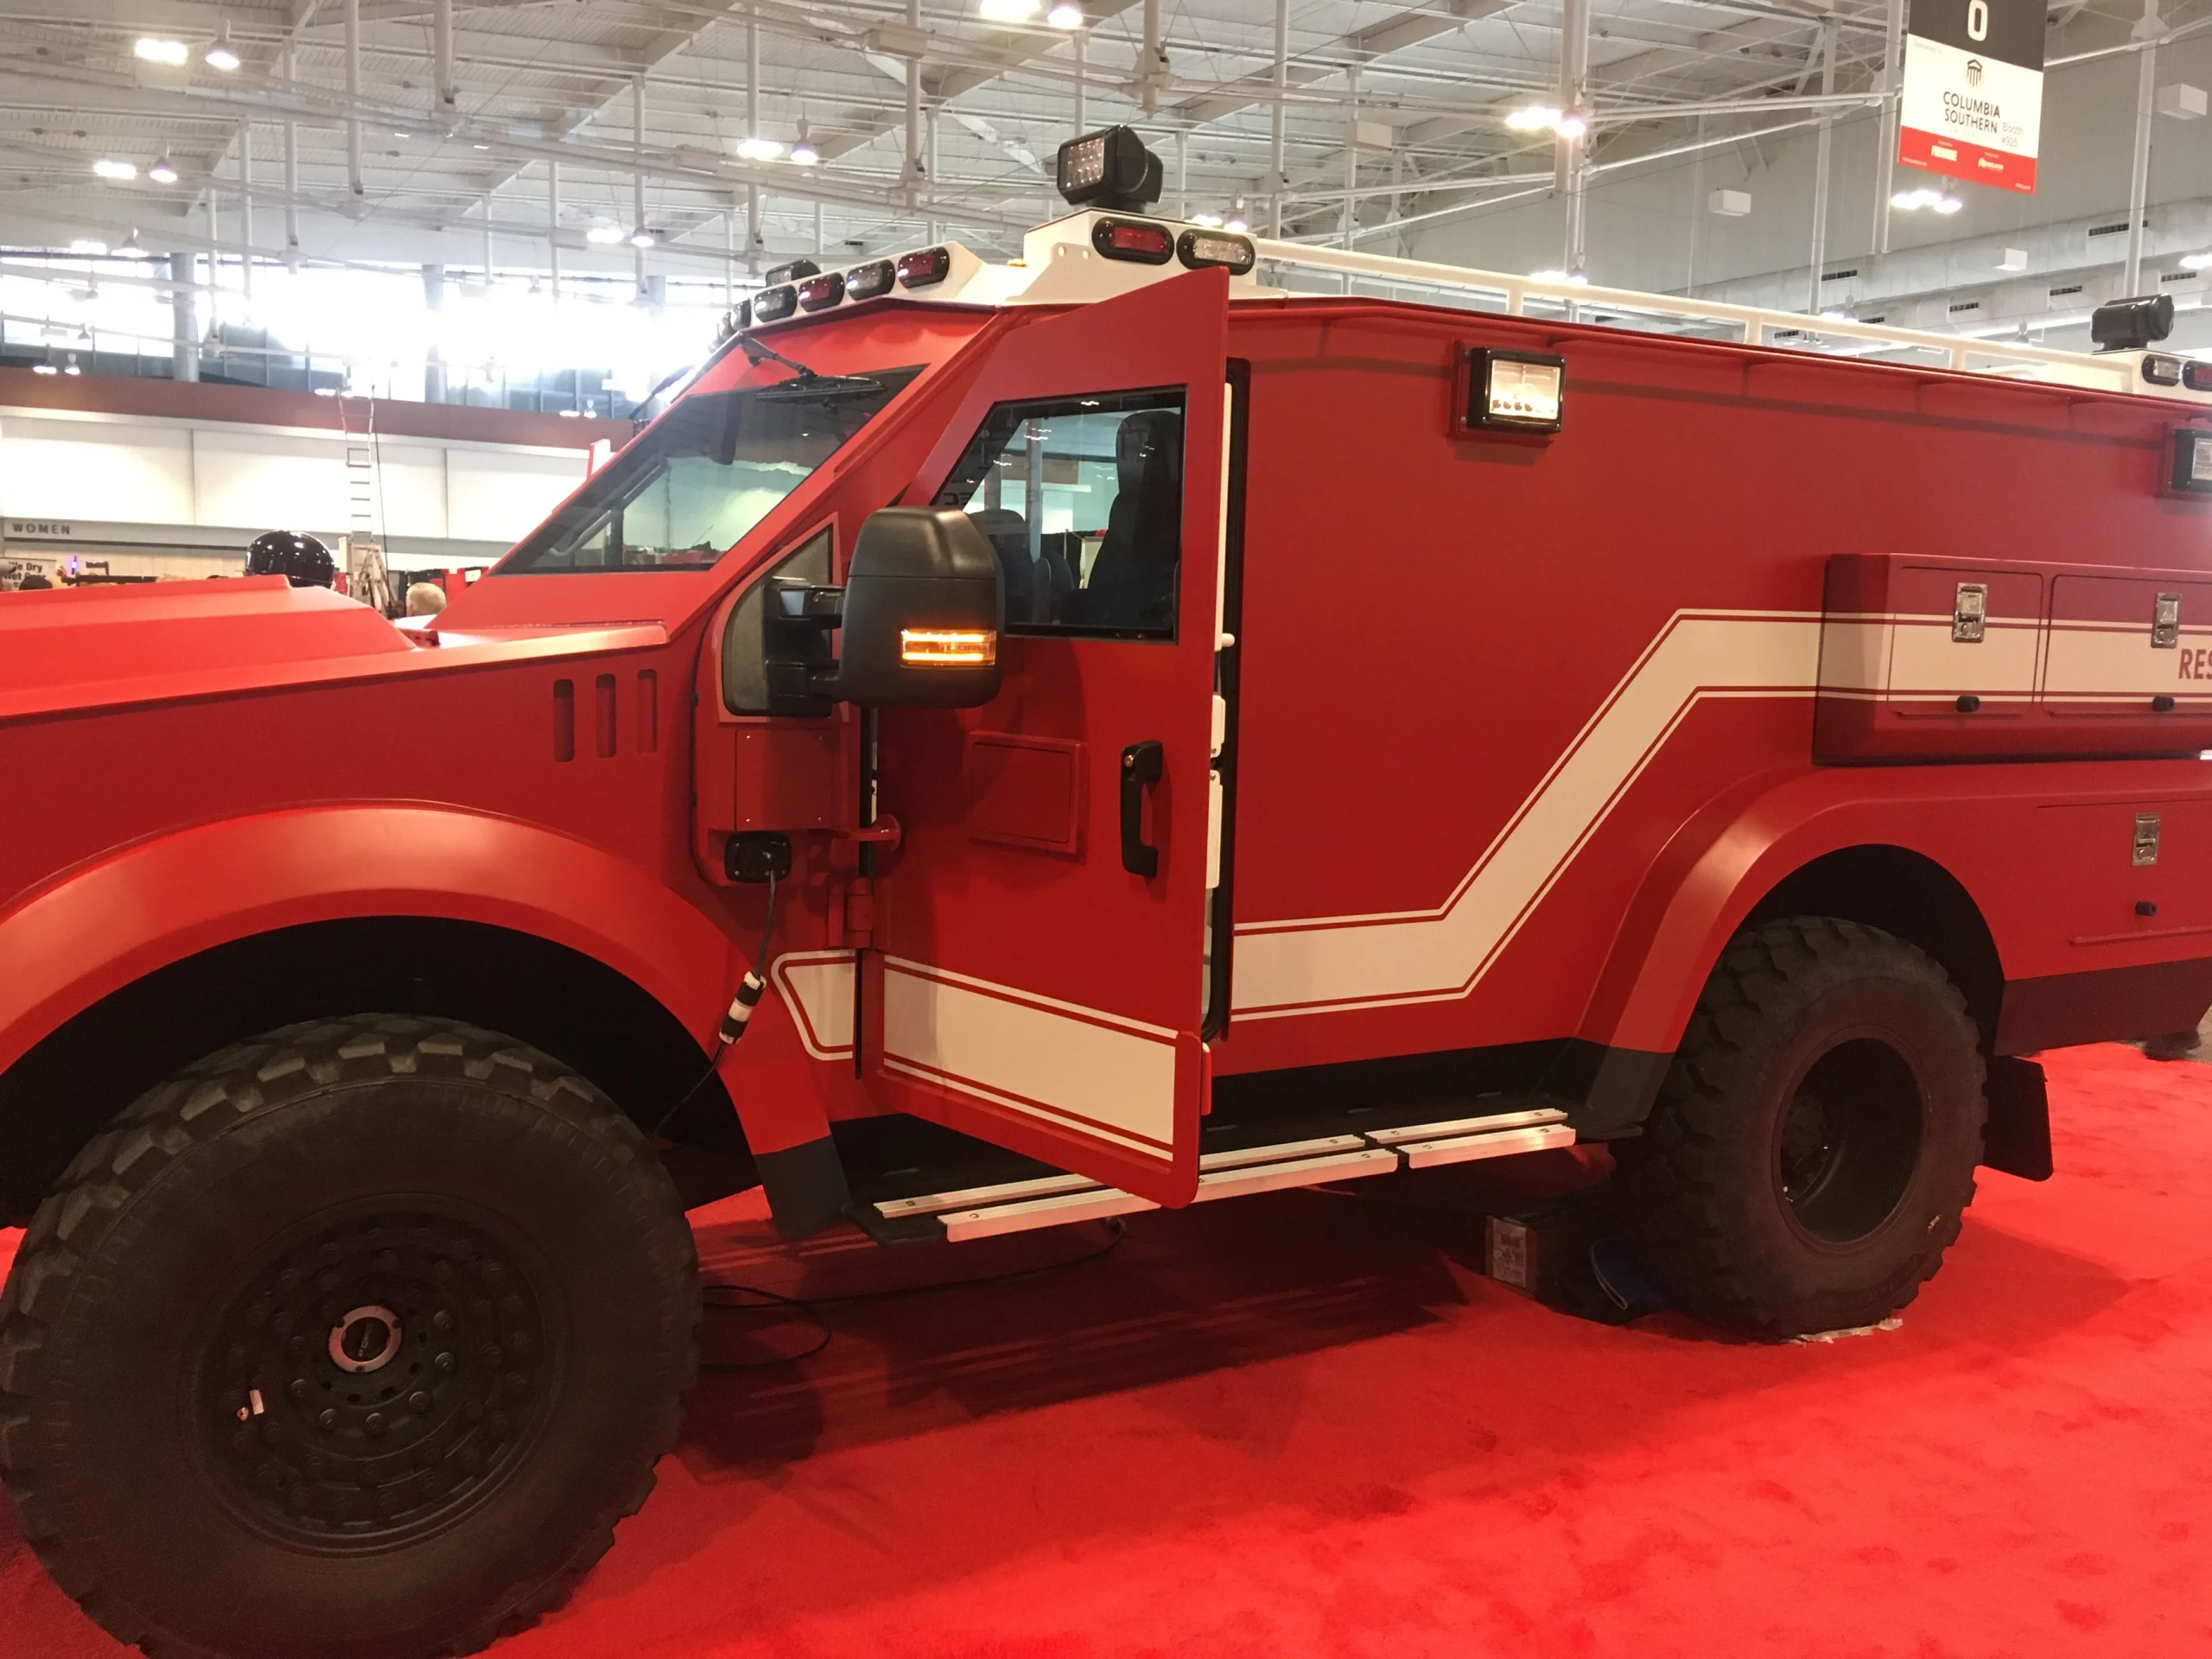 The Lenco fire truck is featured at Firehouse Expo 2019.